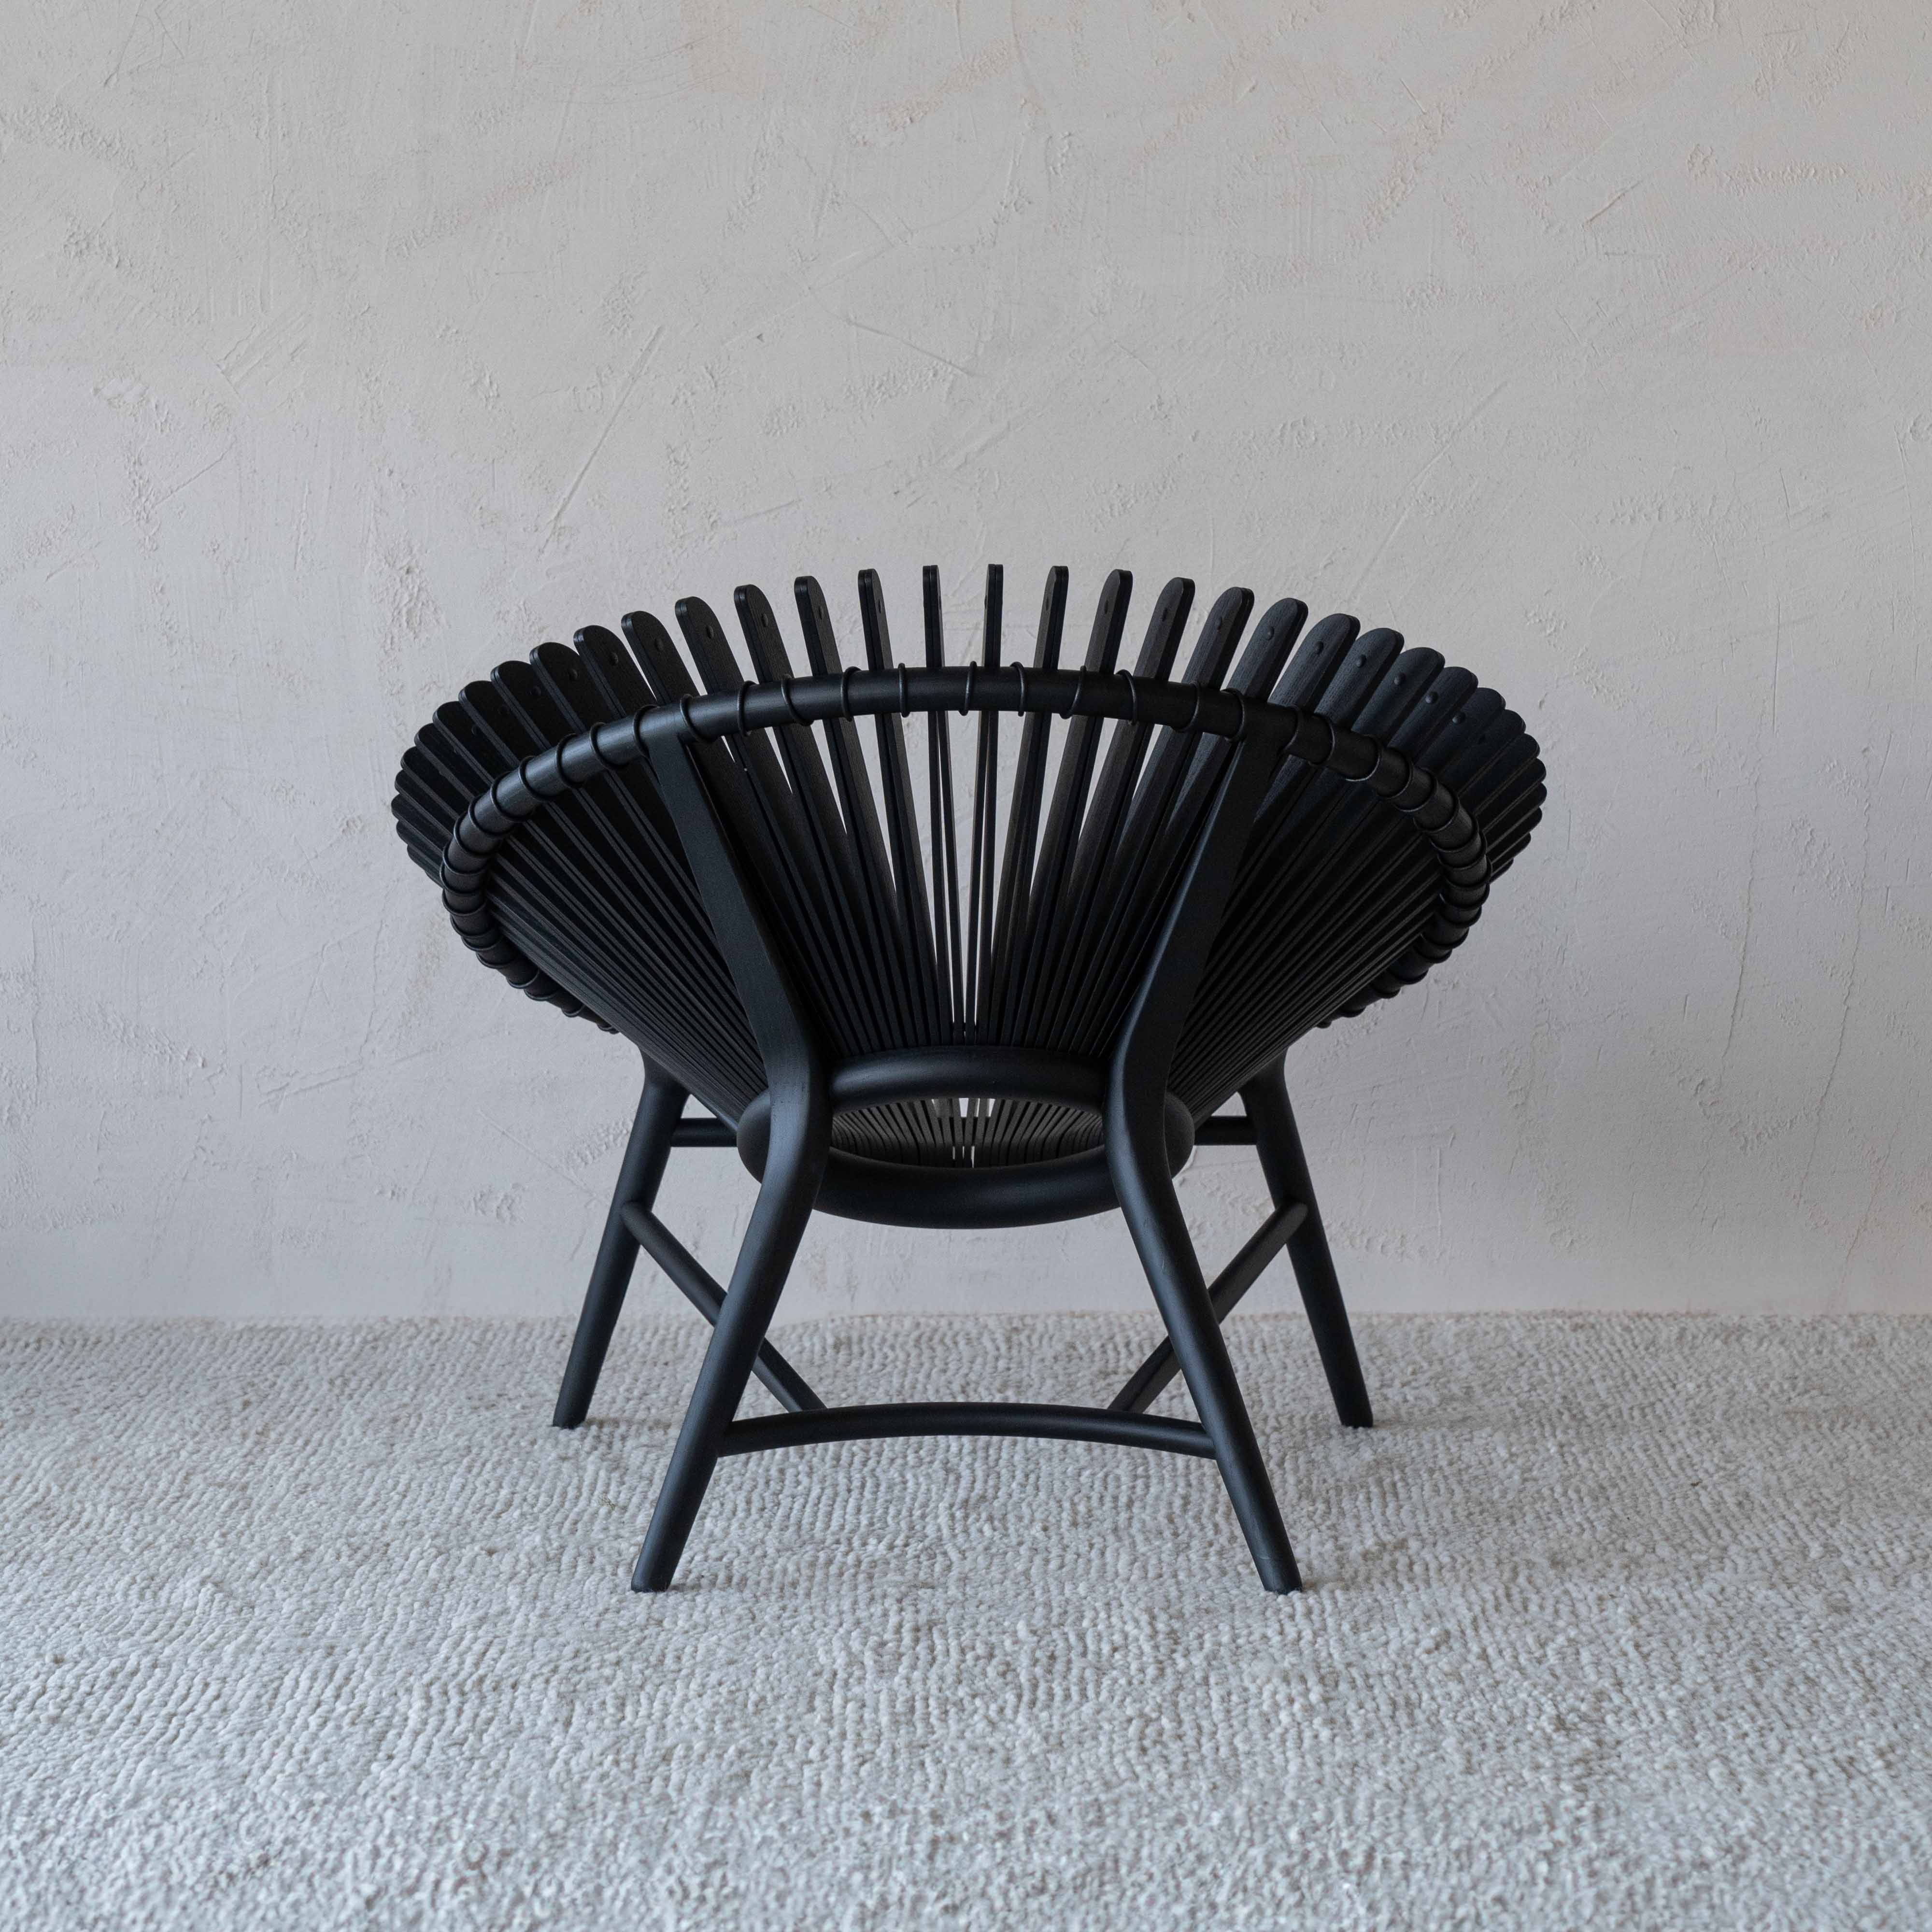 Sun Black Wooden Lounge Chair  - WS Living - UAE - Lounge Chairs Wood and steel Furnitures - Dubai